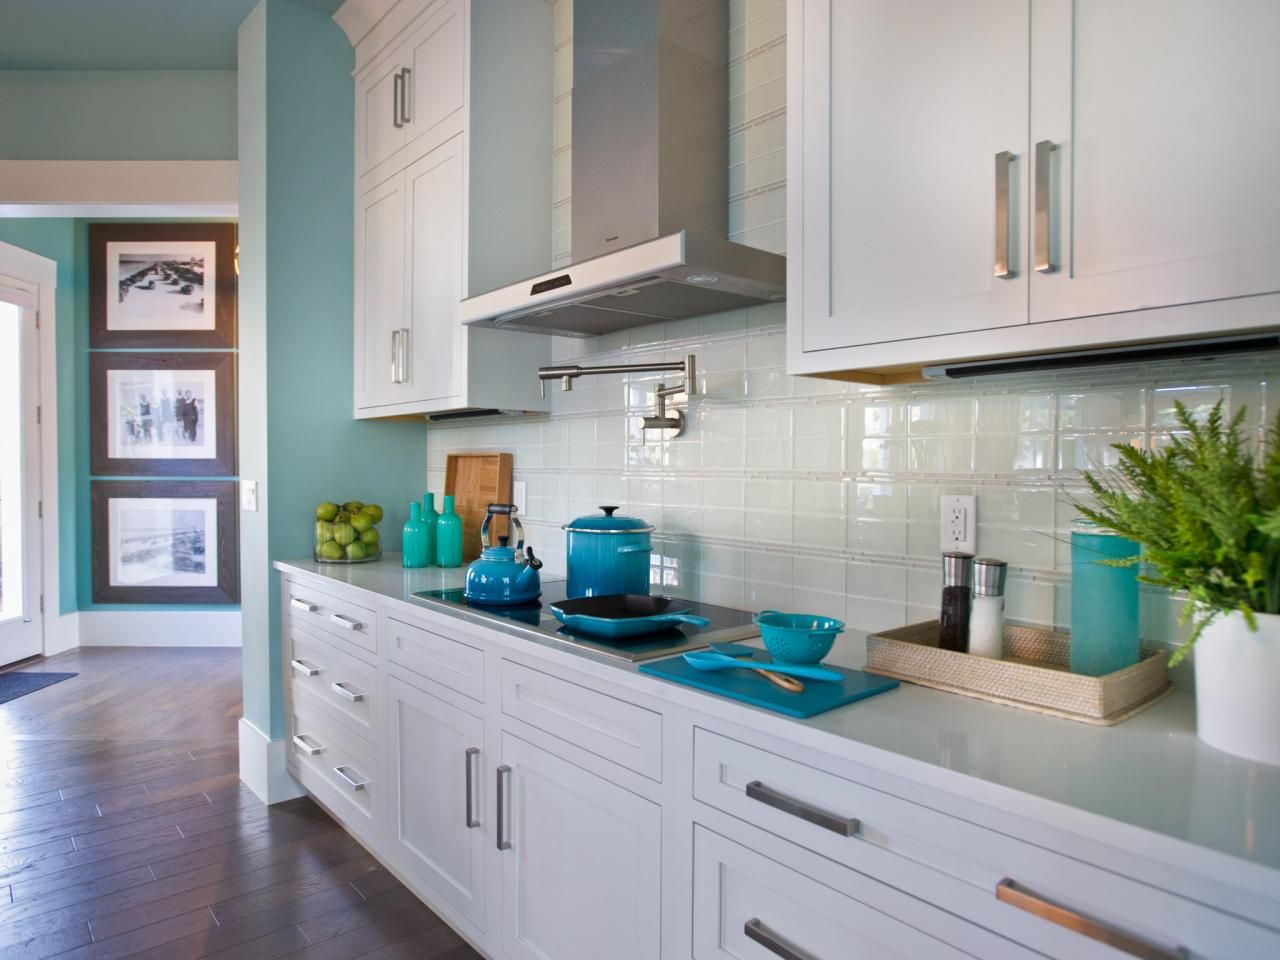 Aesthetics & Functionality: Why Subway Tiles are Ideal for Kitchen Remodels